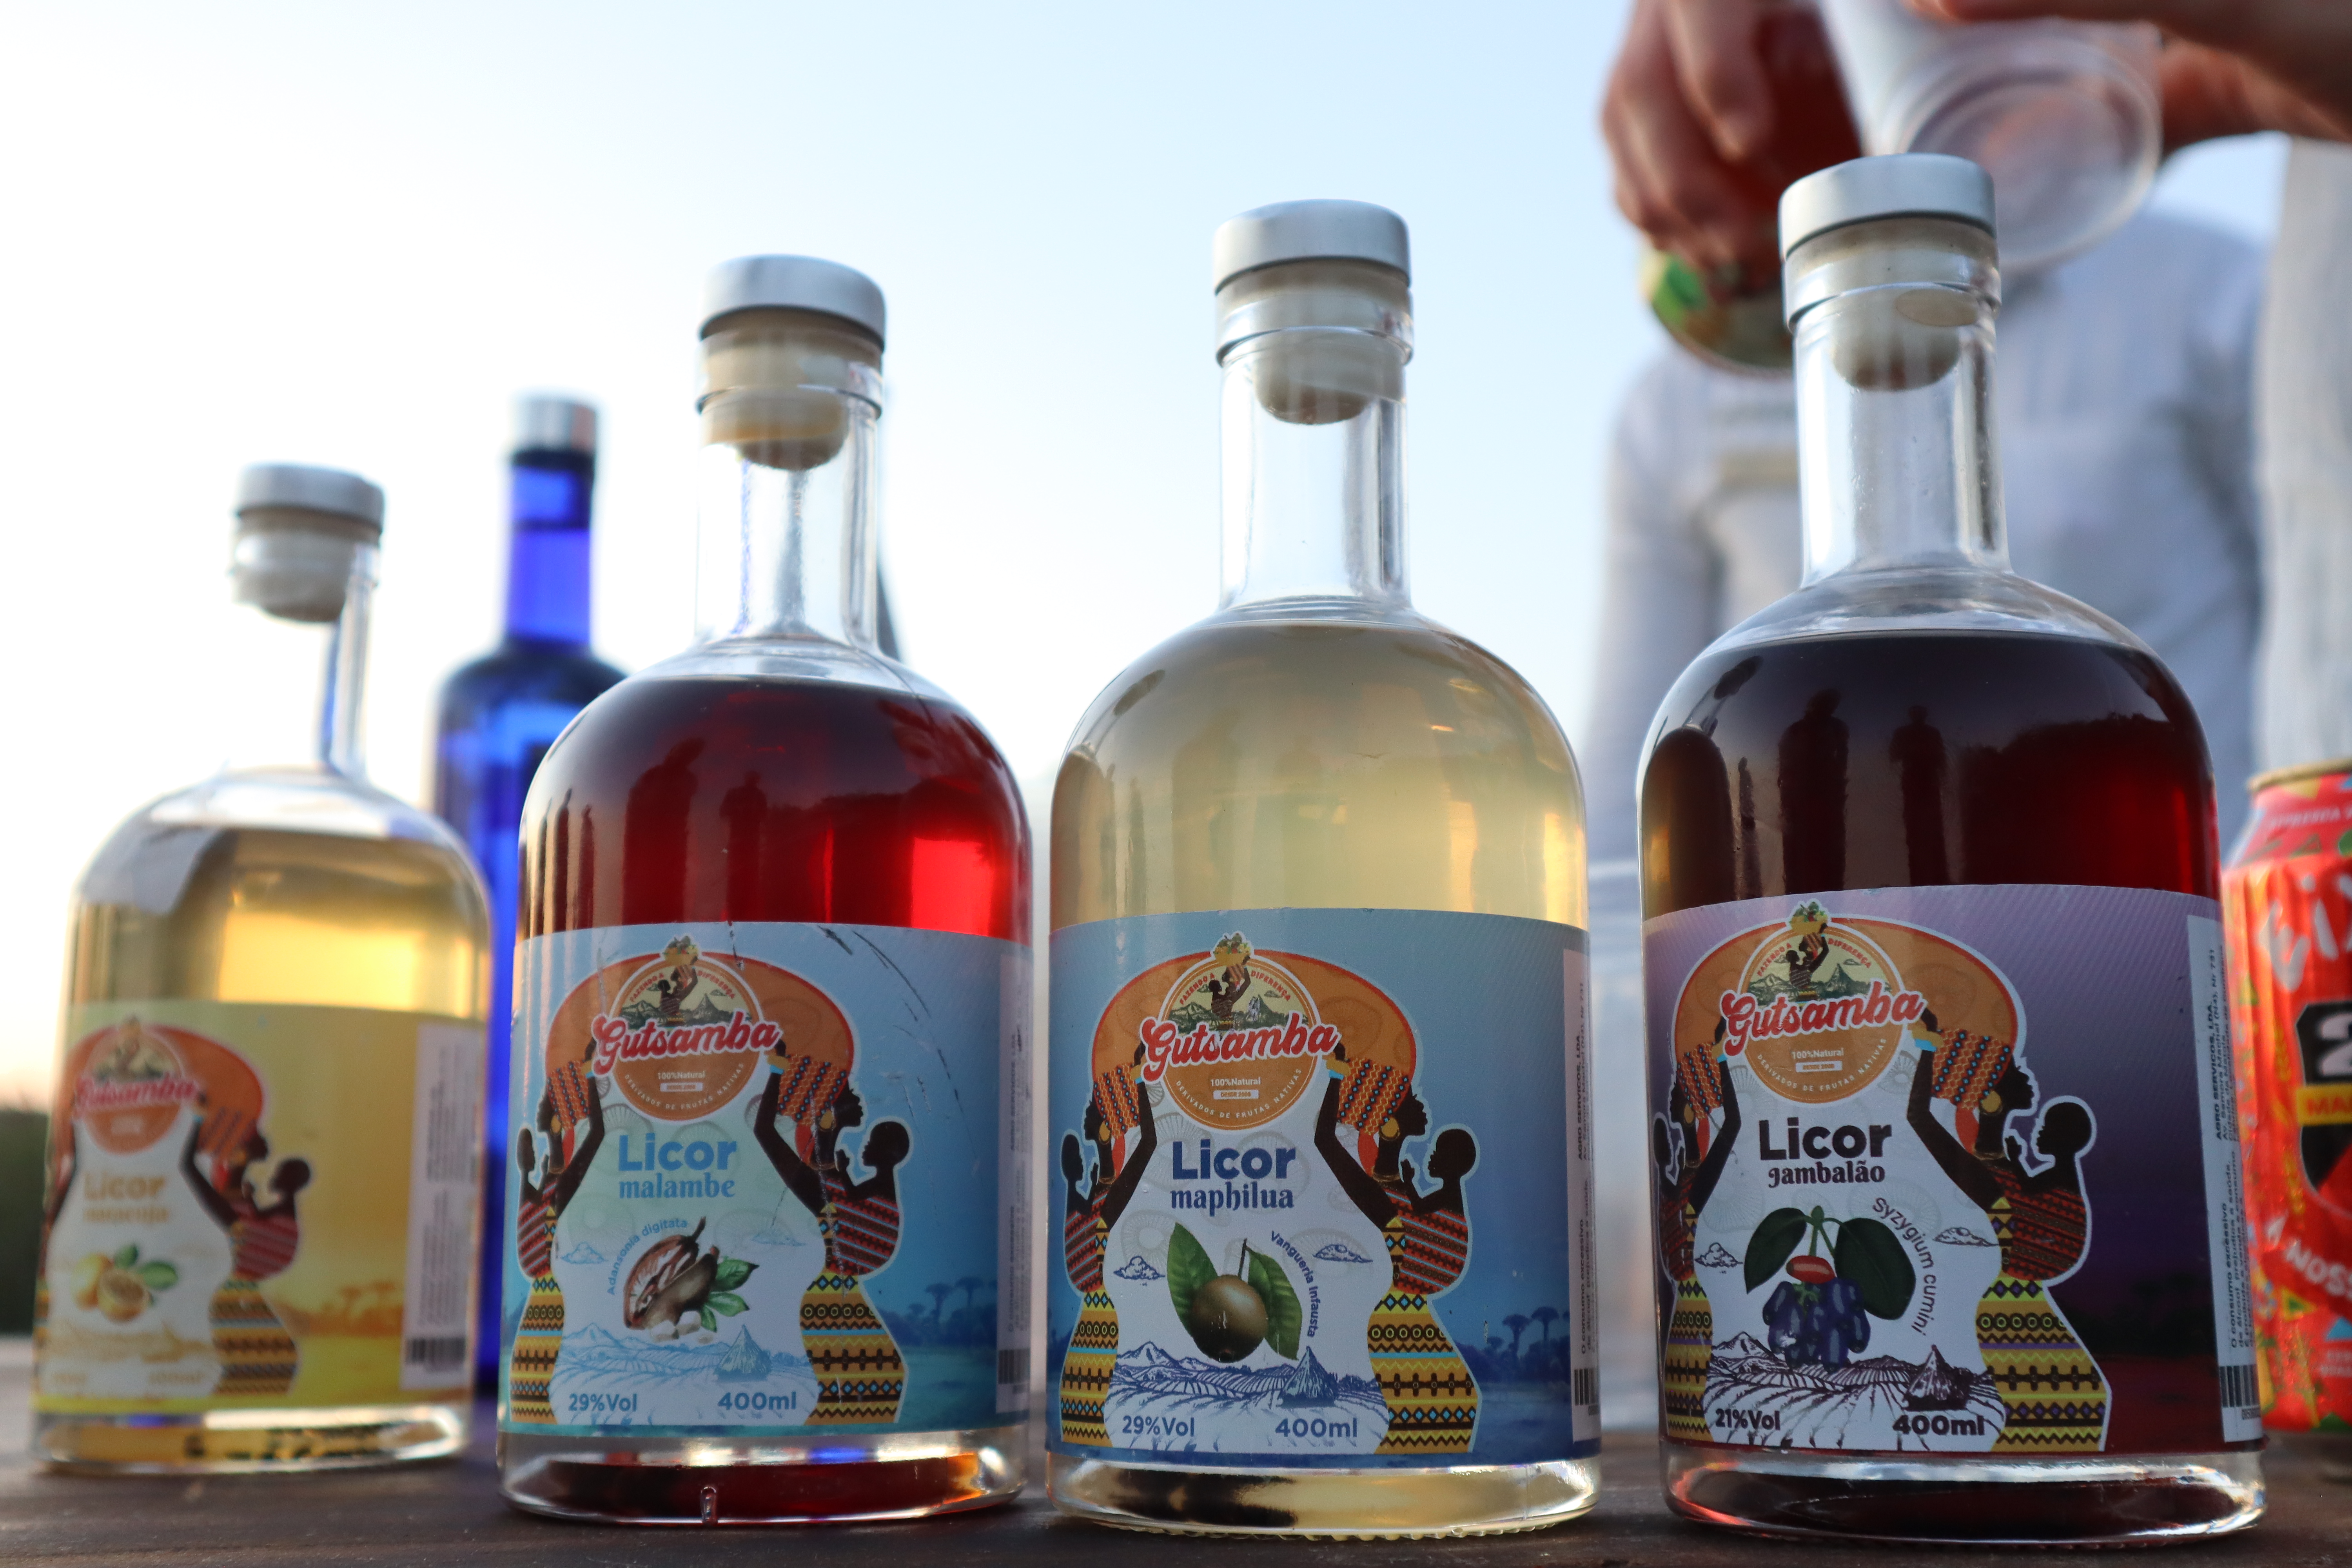 Mozambican liquors made from indigenous fruits and berries were used to make sundowners at Lake Membene. 